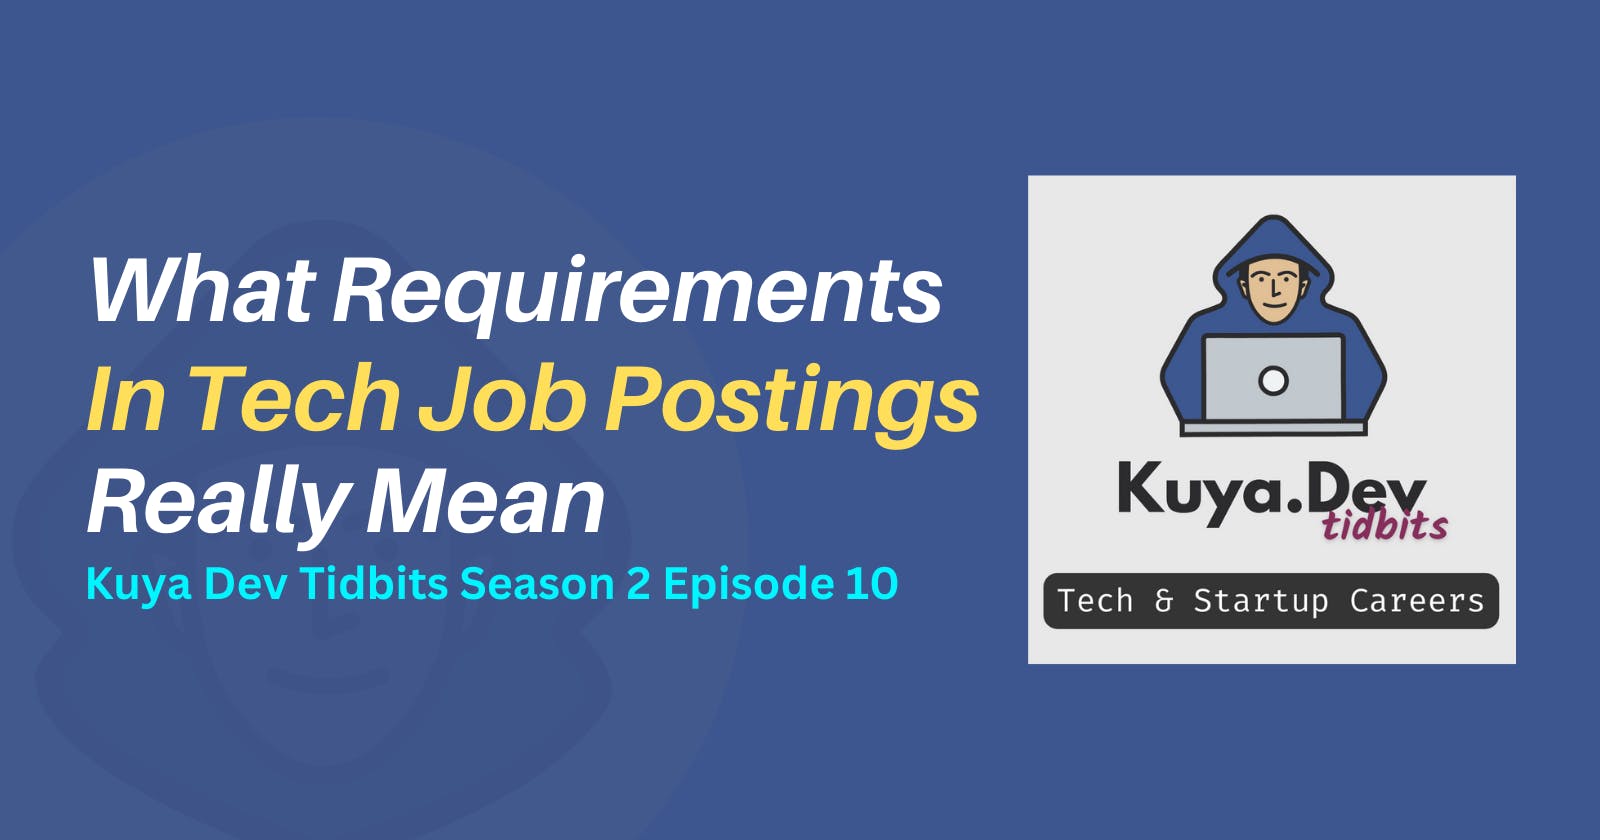 What Requirements in Tech Job Postings Really Mean